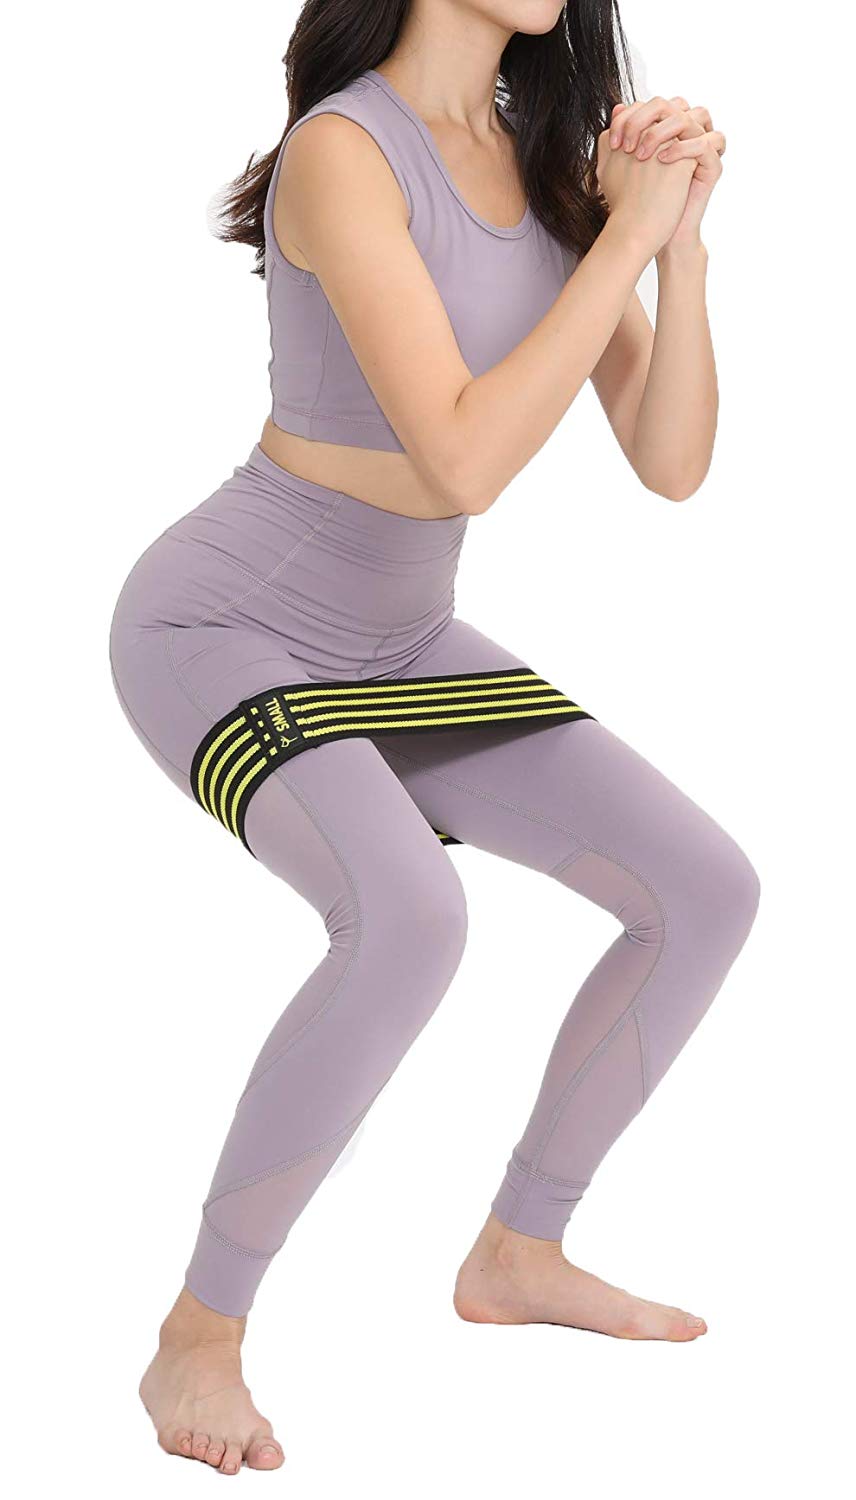 Long Booty Band Hip Circle Loop Resistance Band Workout Exercise for Legs  Thigh Glute Butt Squat Non-slip Design